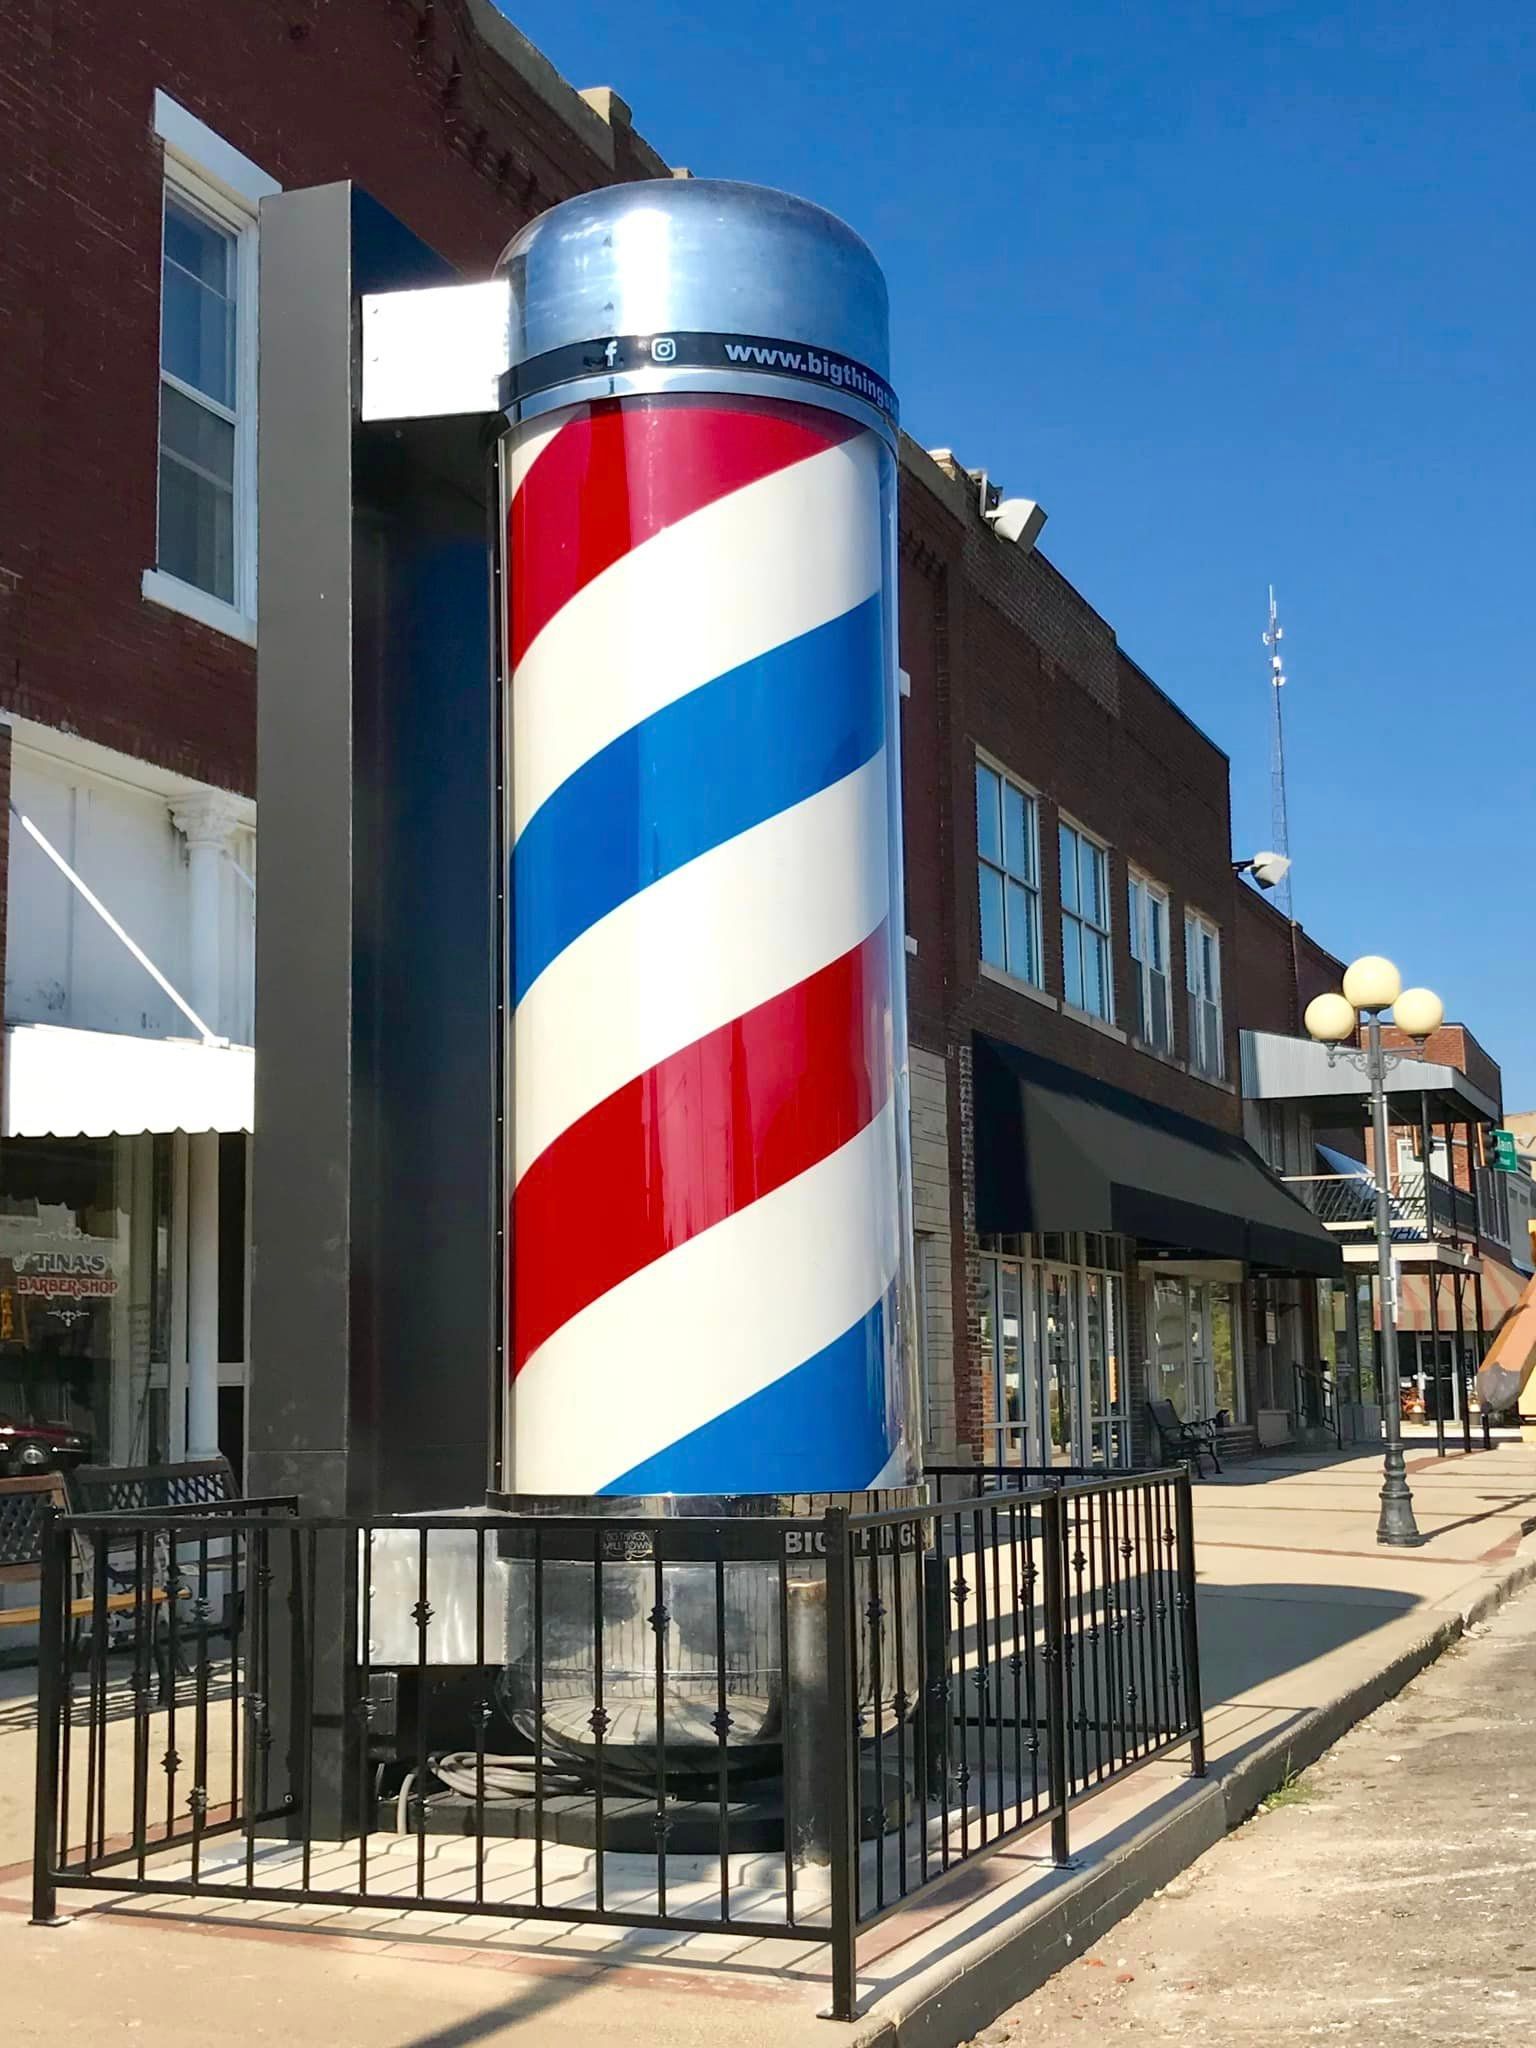 World’s Largest Barbershop Pole, world record in Casey, Illinois
